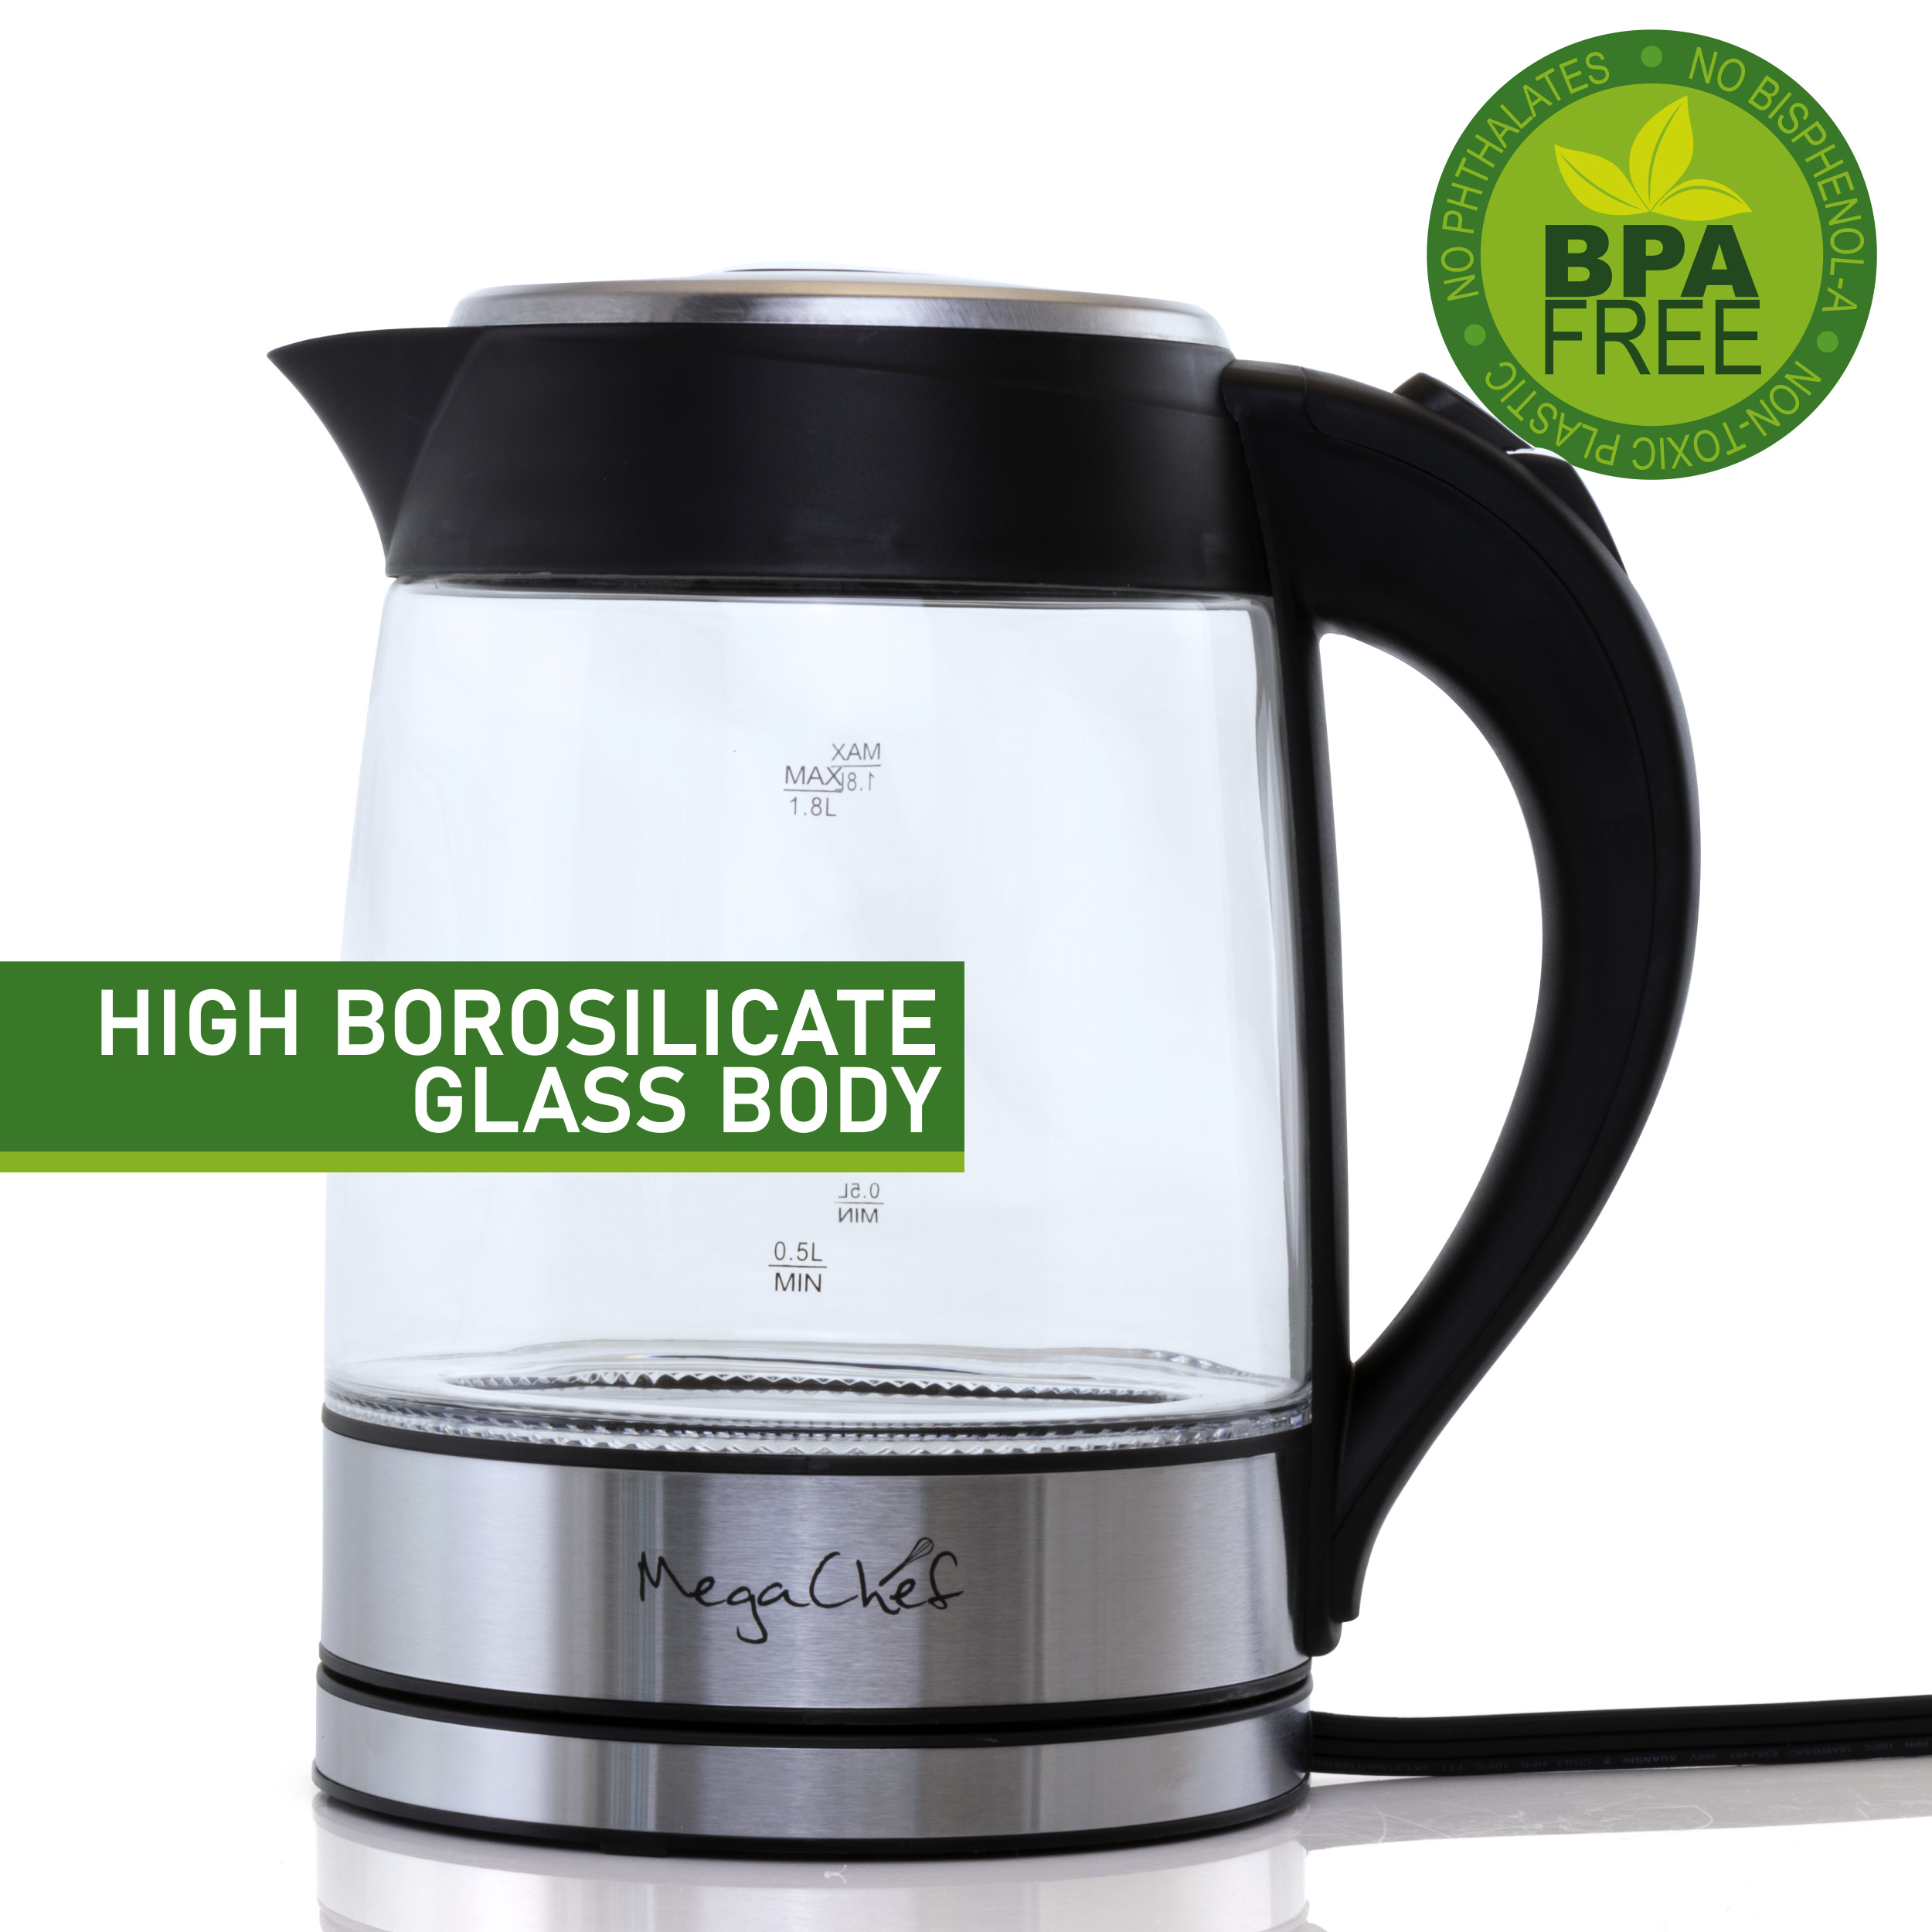 MegaChef 1.8 Liter Glass and Stainless Steel Electric Tea Kettle - image 2 of 11